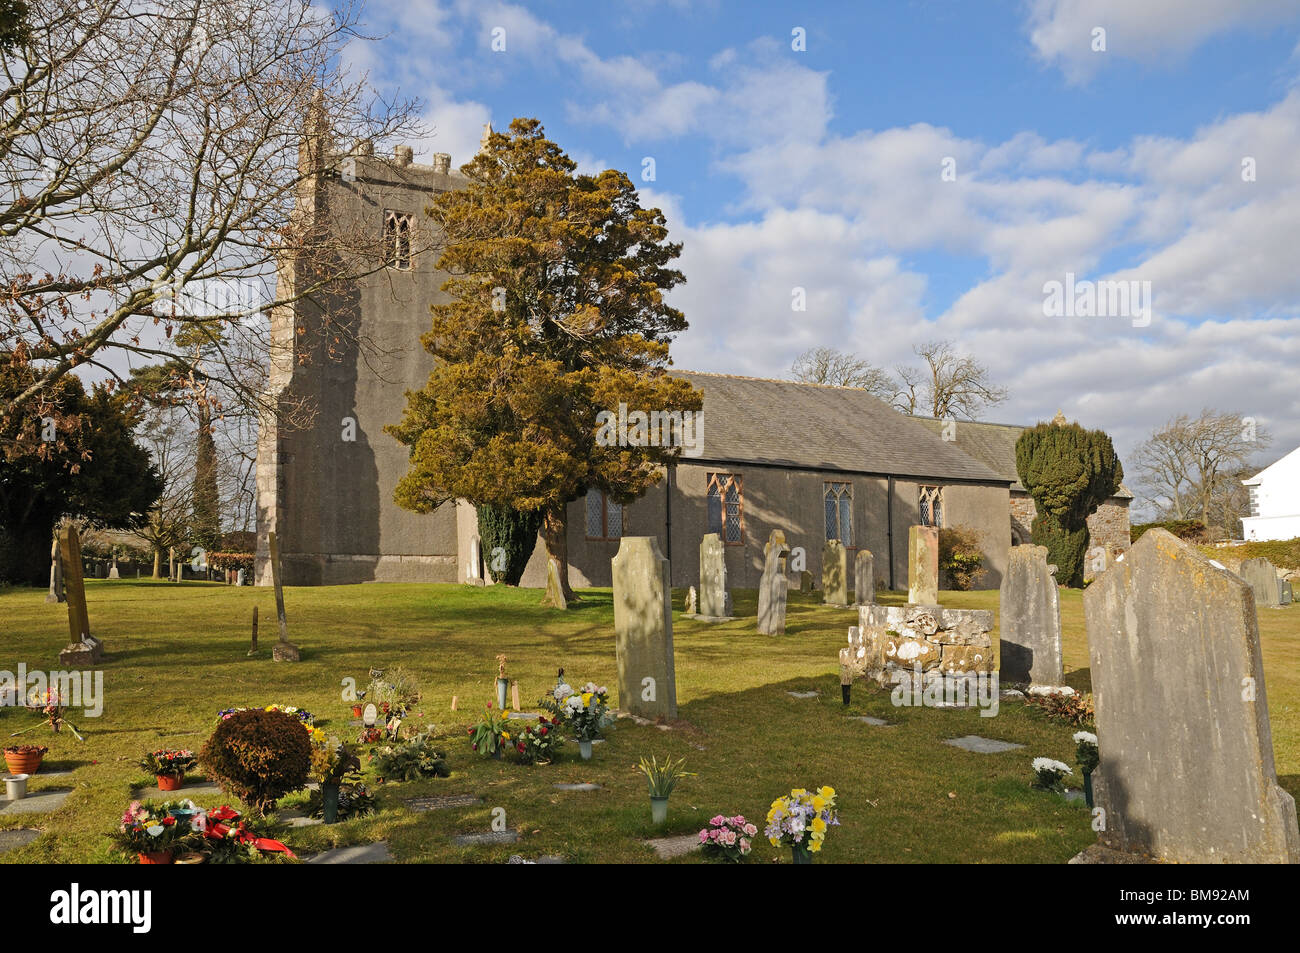 Gravestones and flowers in graveyard of St Cuthbert’s Church Aldingham Cumbria with yew tree Stock Photo